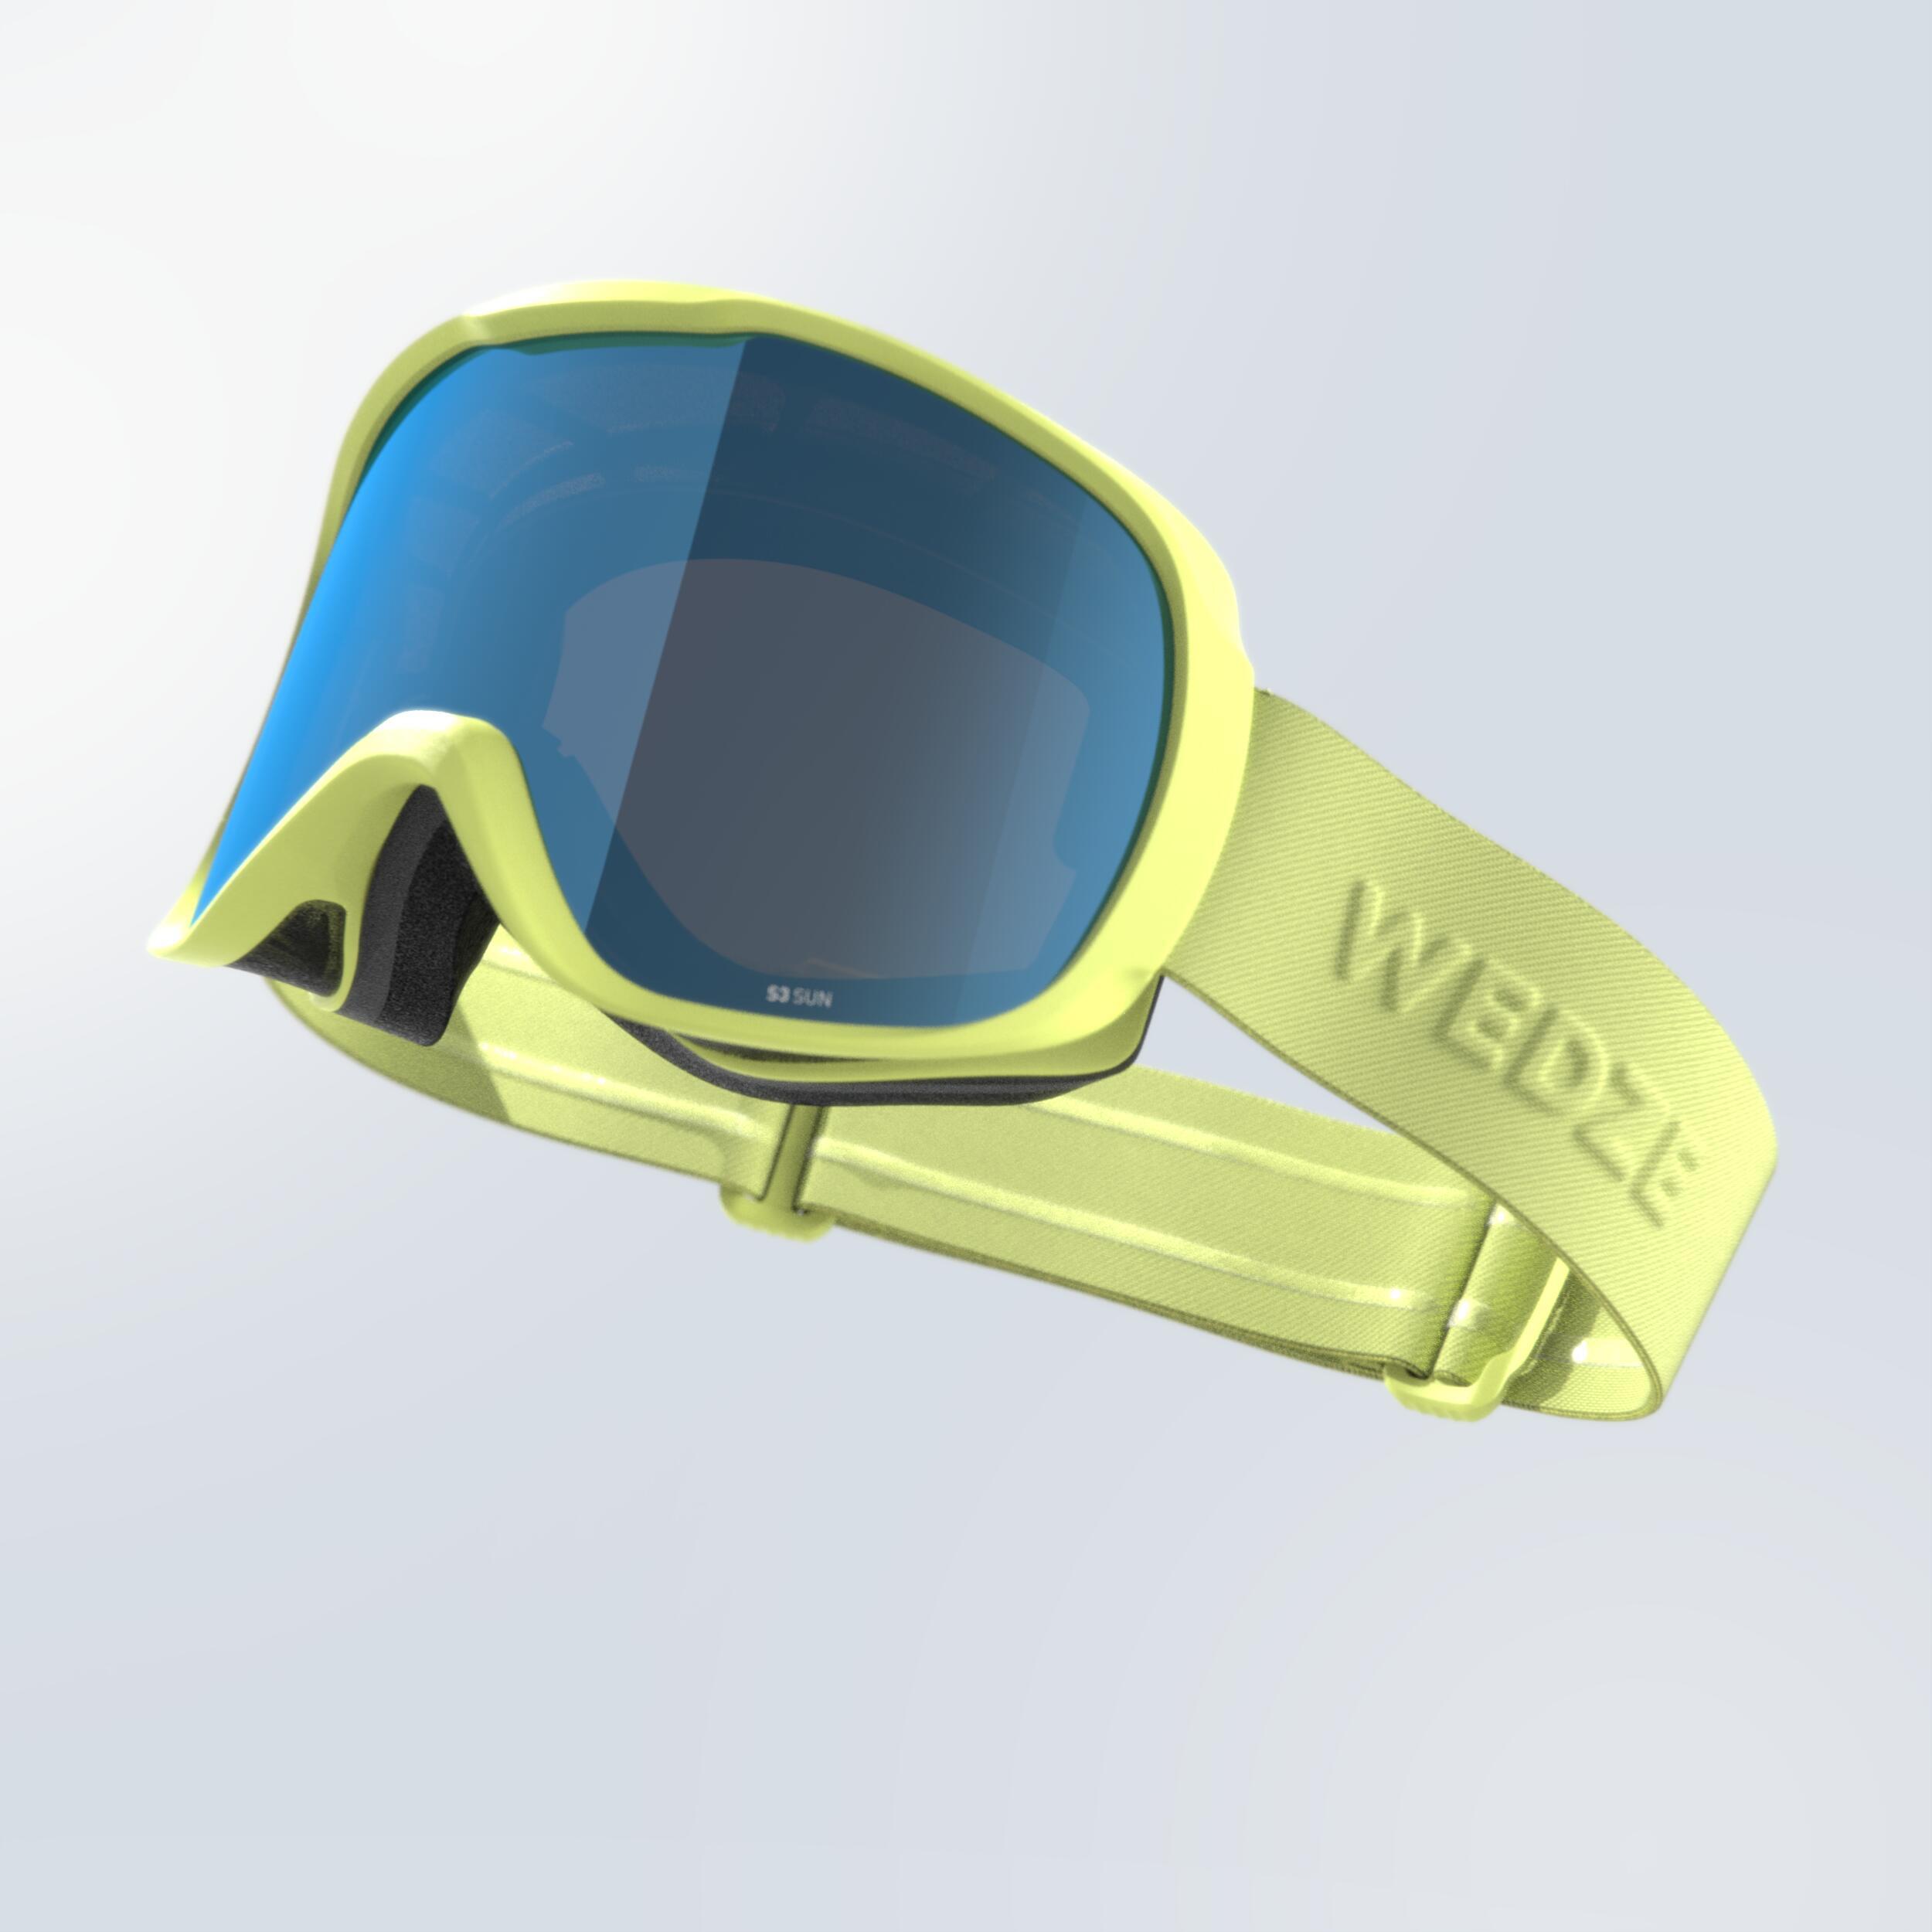 KIDS’ AND ADULT SKIING AND SNOWBOARDING GOGGLES GOOD WEATHER - G 500 S3 - YELLOW 2/5